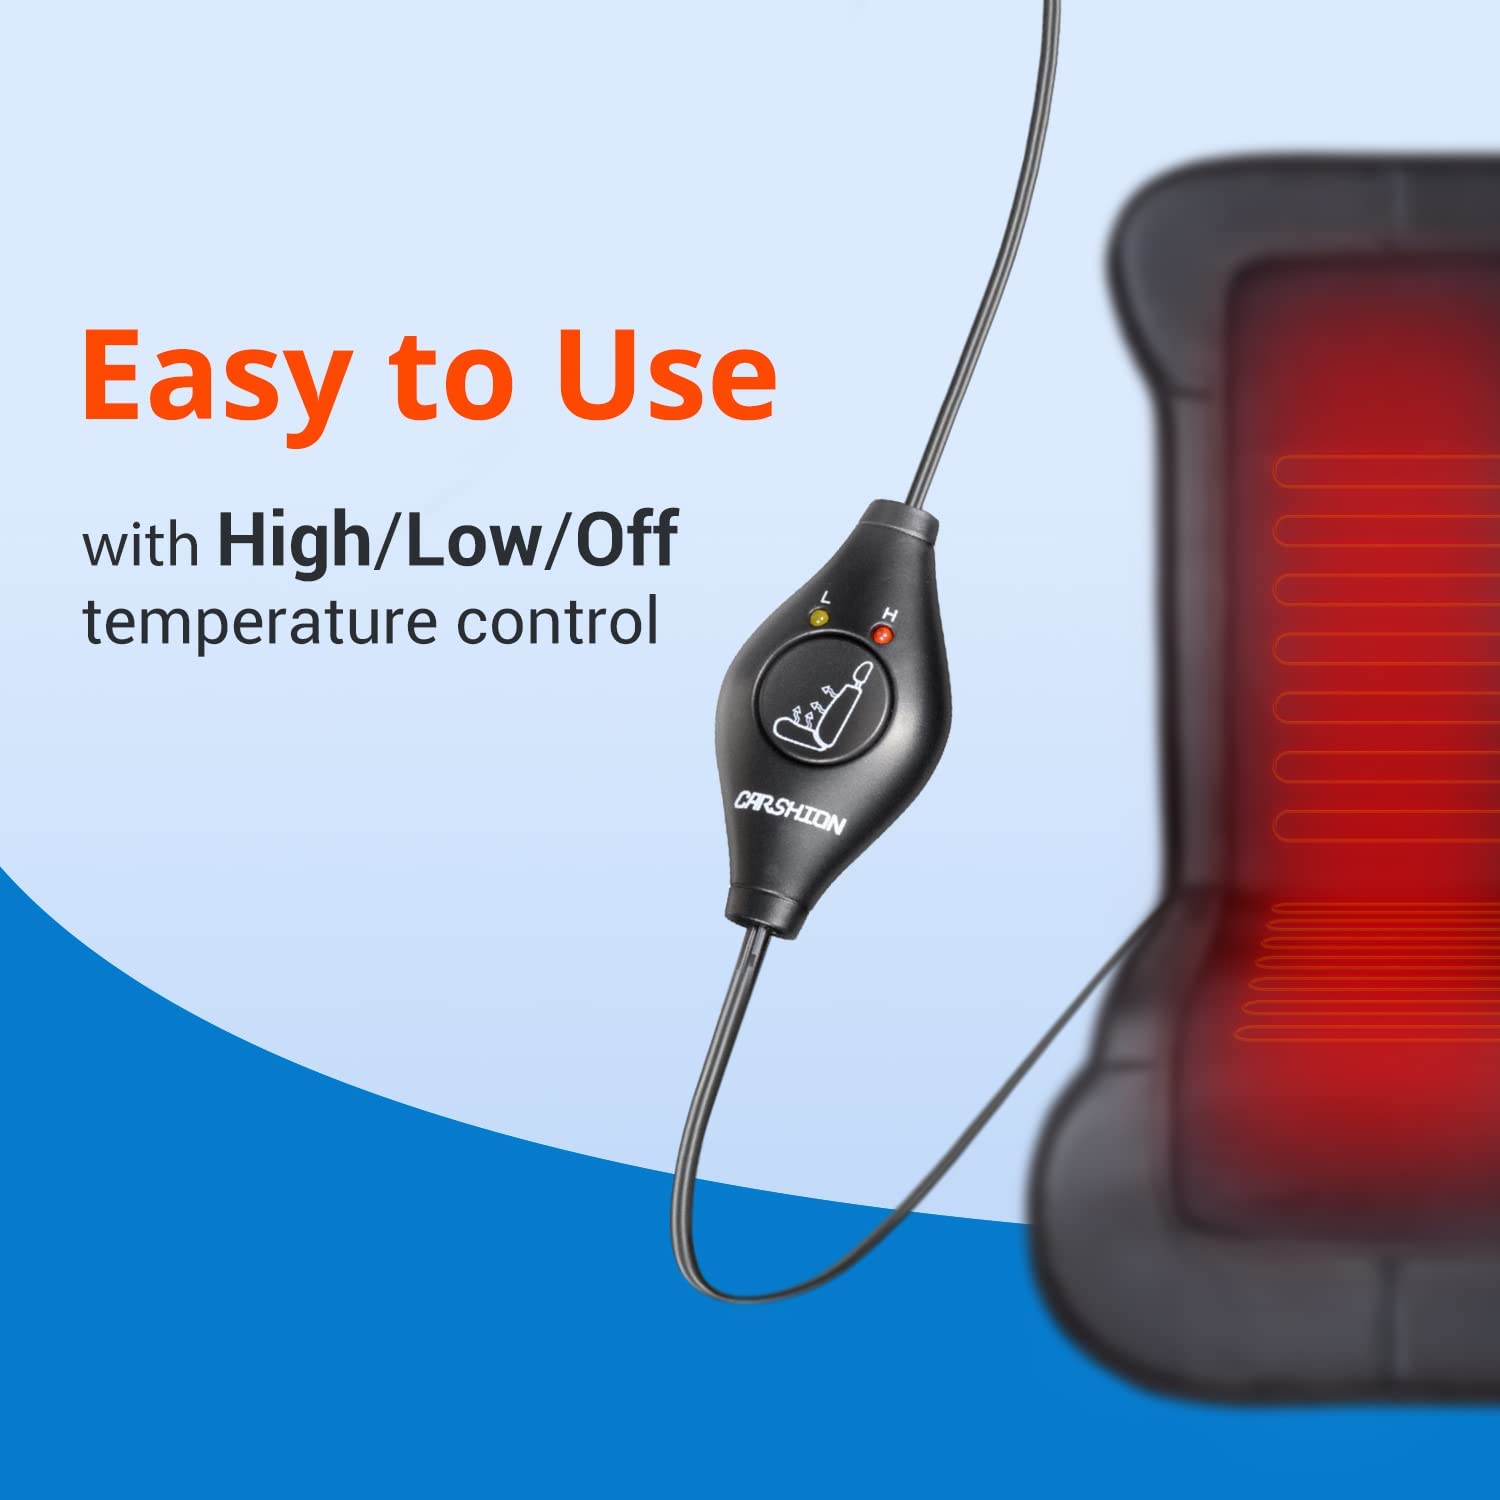 Mynt Heated Seat Covers for Back: Seat Cushion with Heat for Winter